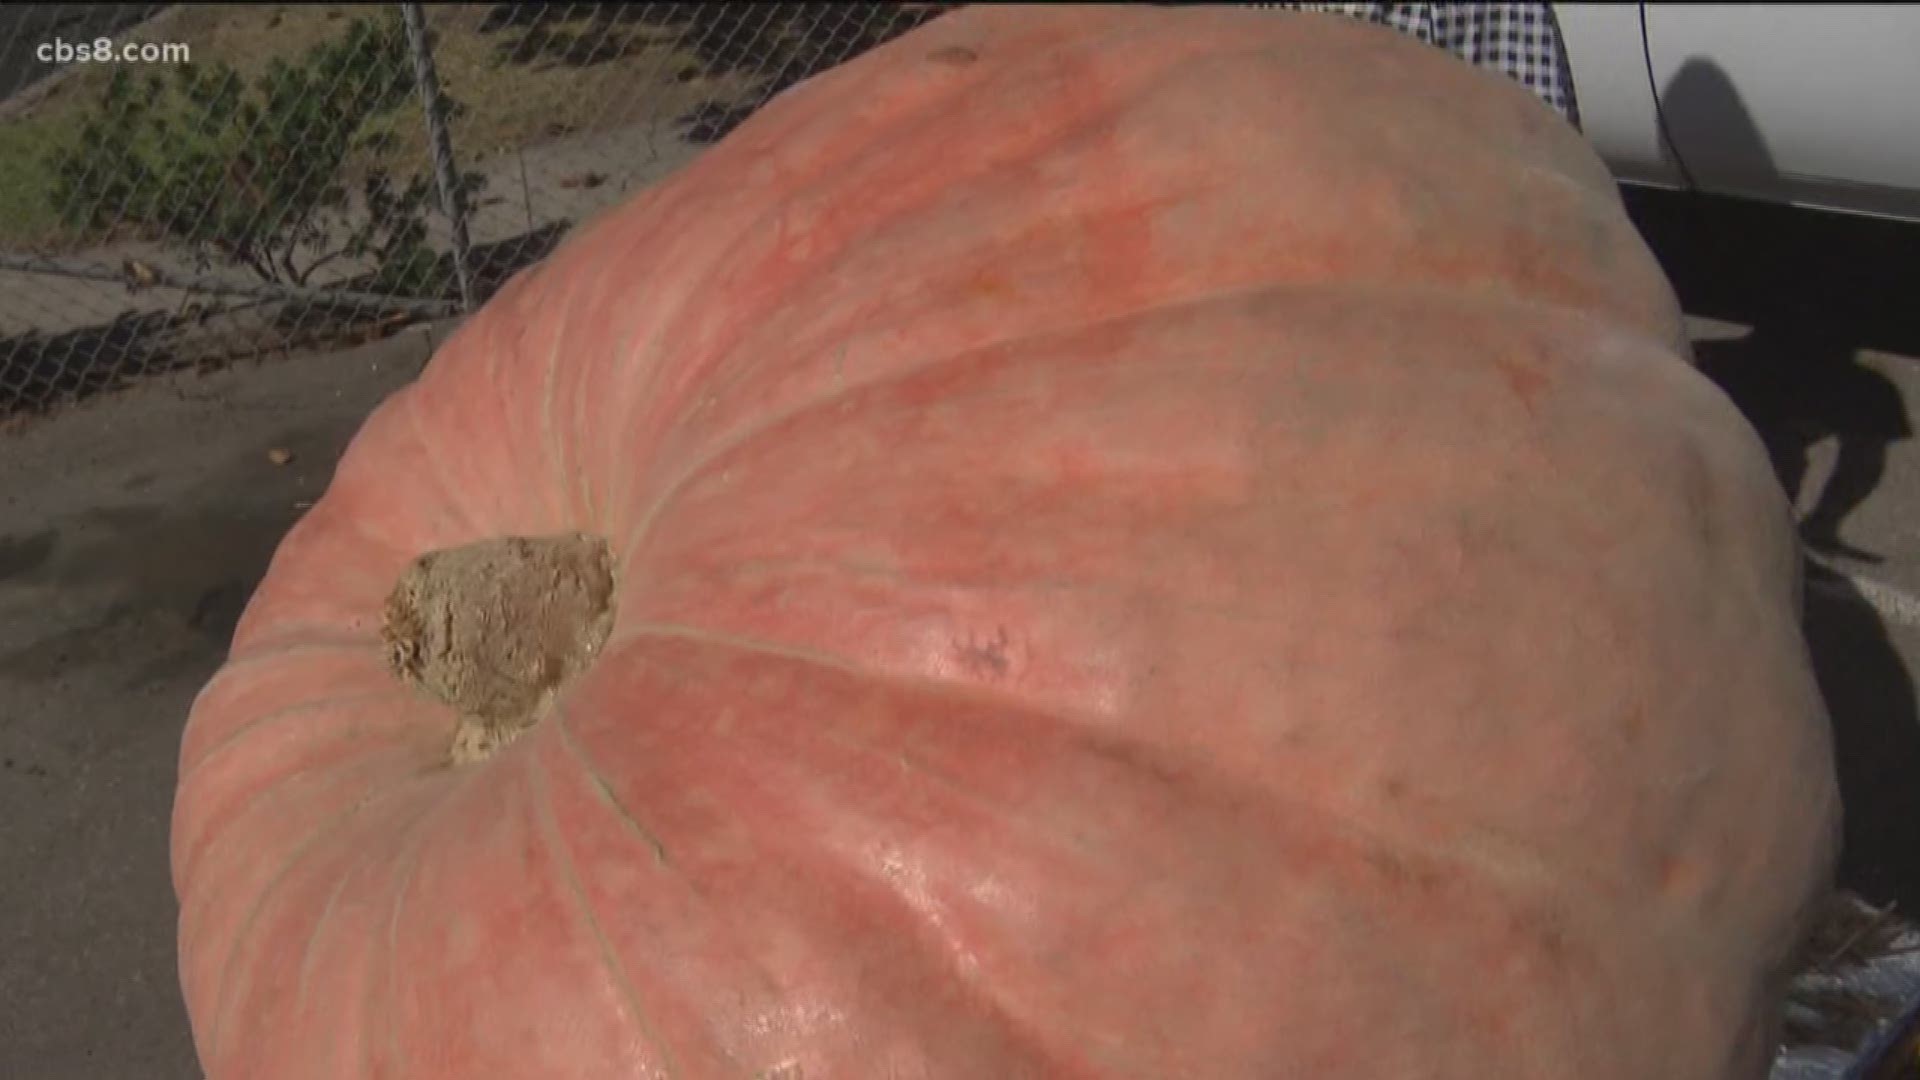 This pumpkin weighs nearly two tons and is worth thousands of dollars.